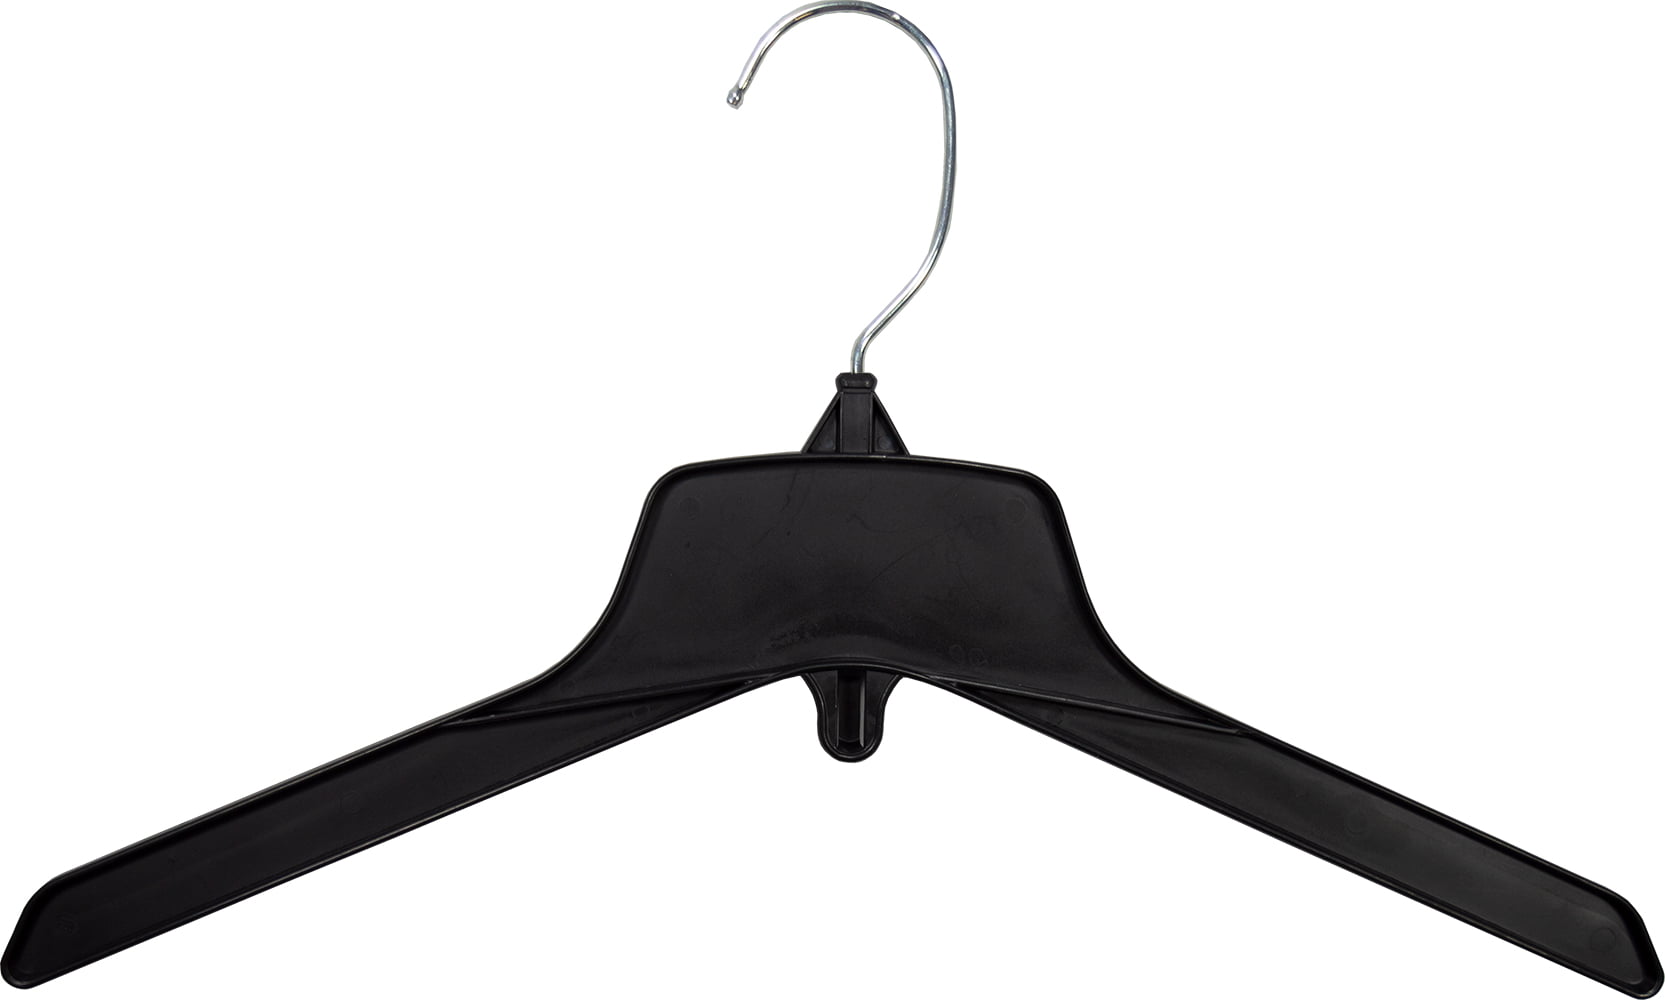 Plastic Hangers HD Heavy Duty, 16 Pcs. Elegant Black Color, Made in USA,  3/8” Thickness, Durable, Tubular, Lightweight, for Clothes, Coat, Pants,  Shirts, Dress and More, Free and Quick delivery. : Home & Kitchen 